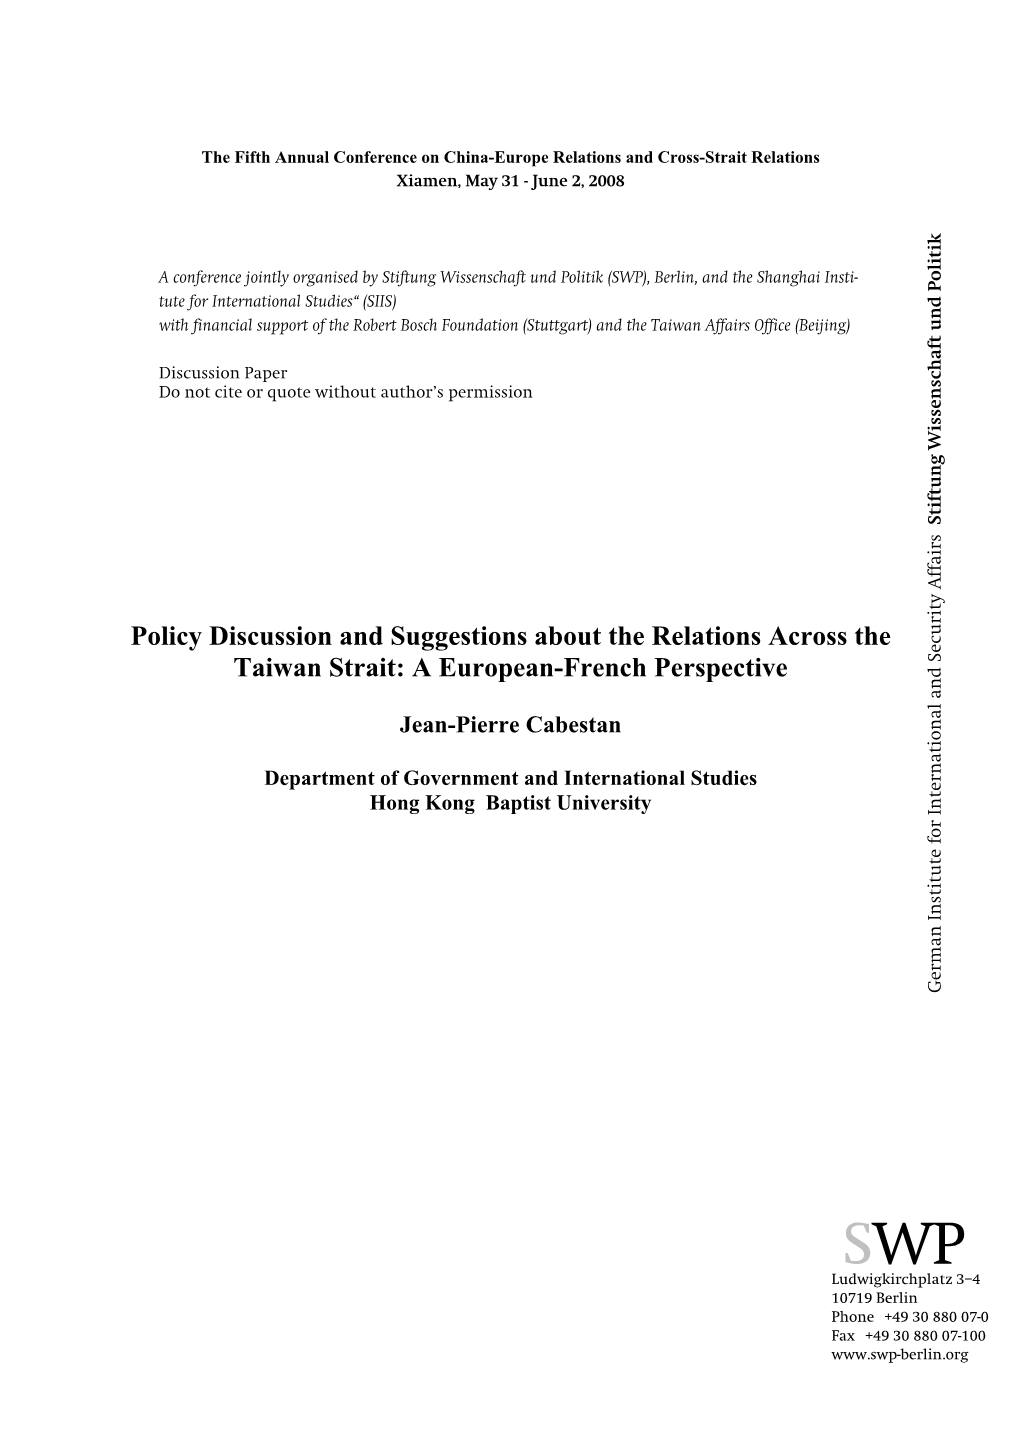 Policy Discussion and Suggestions About the Relations Across the Taiwan Strait: a European-French Perspective